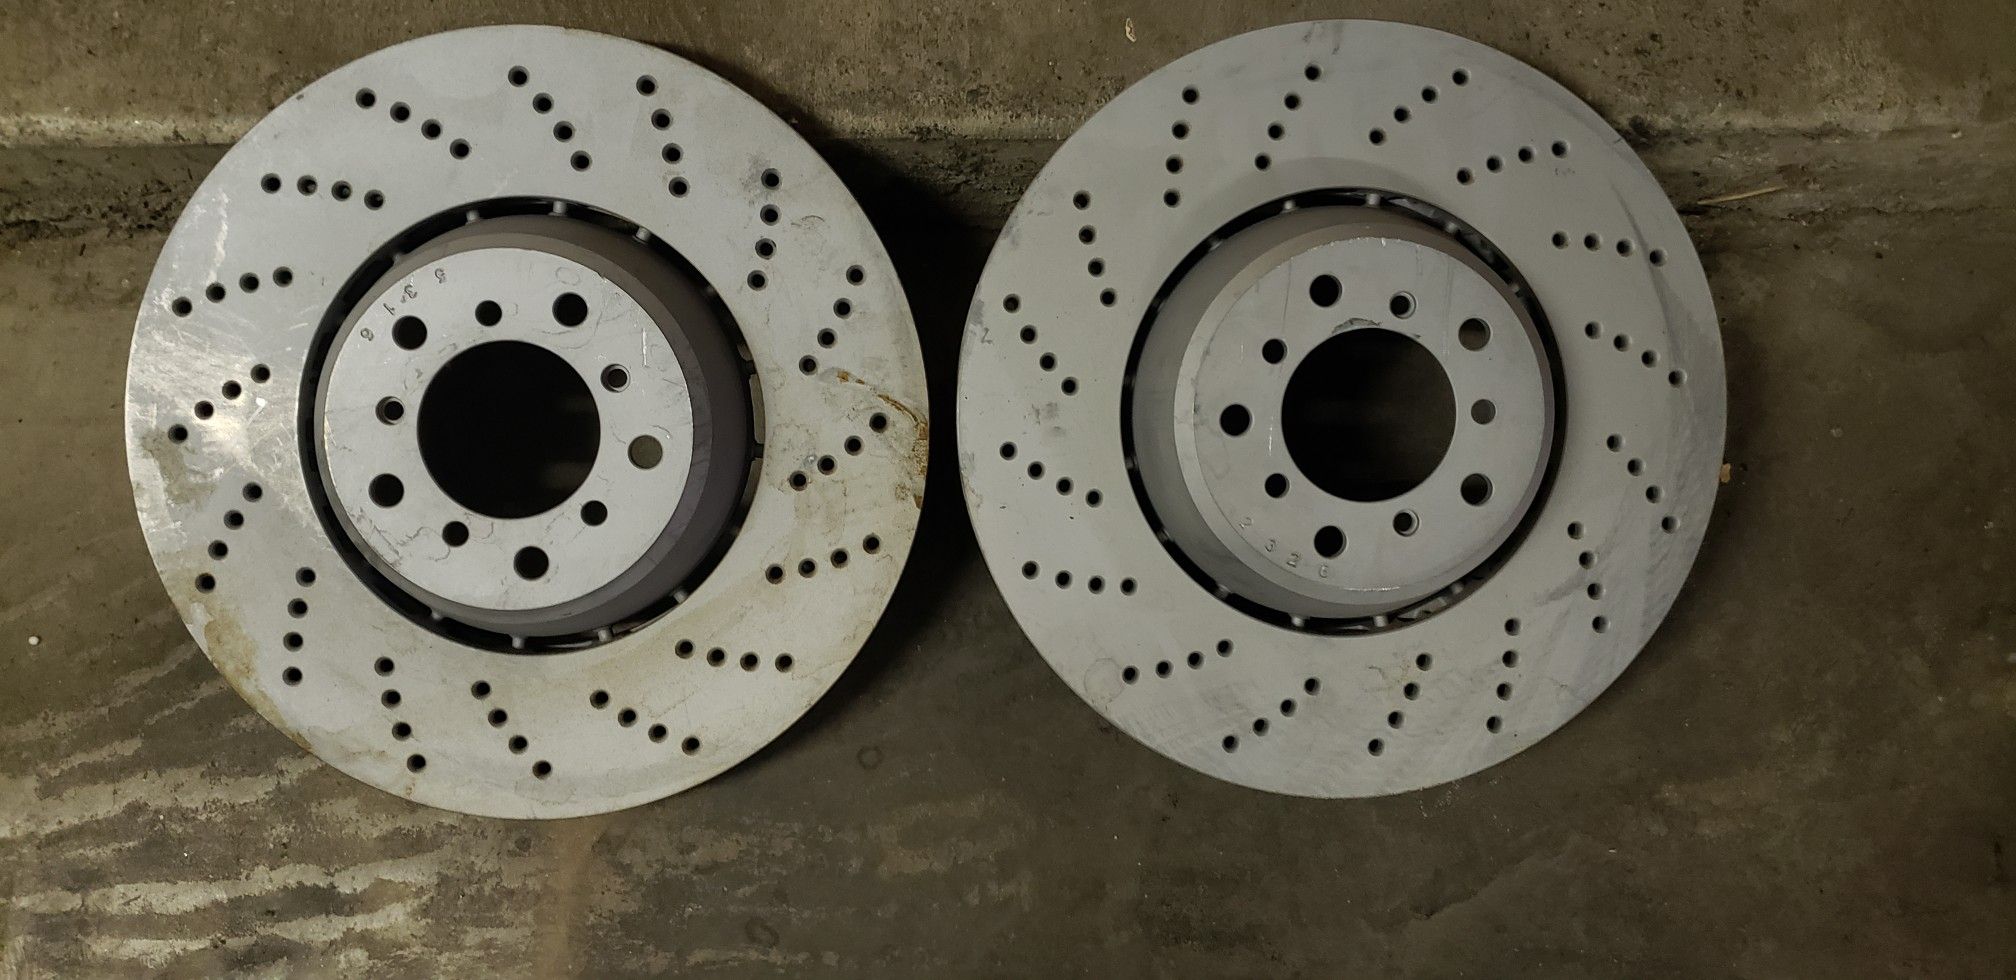 [NEW] 2004-2010 BMW S85 V10 E60 M5 M6 ZIMMERMANN 2 FRONT BRAKE DISCS ROTORS CROSS DRILLED AND CERAMIC COATED MADE IN GERMANY NON RUST